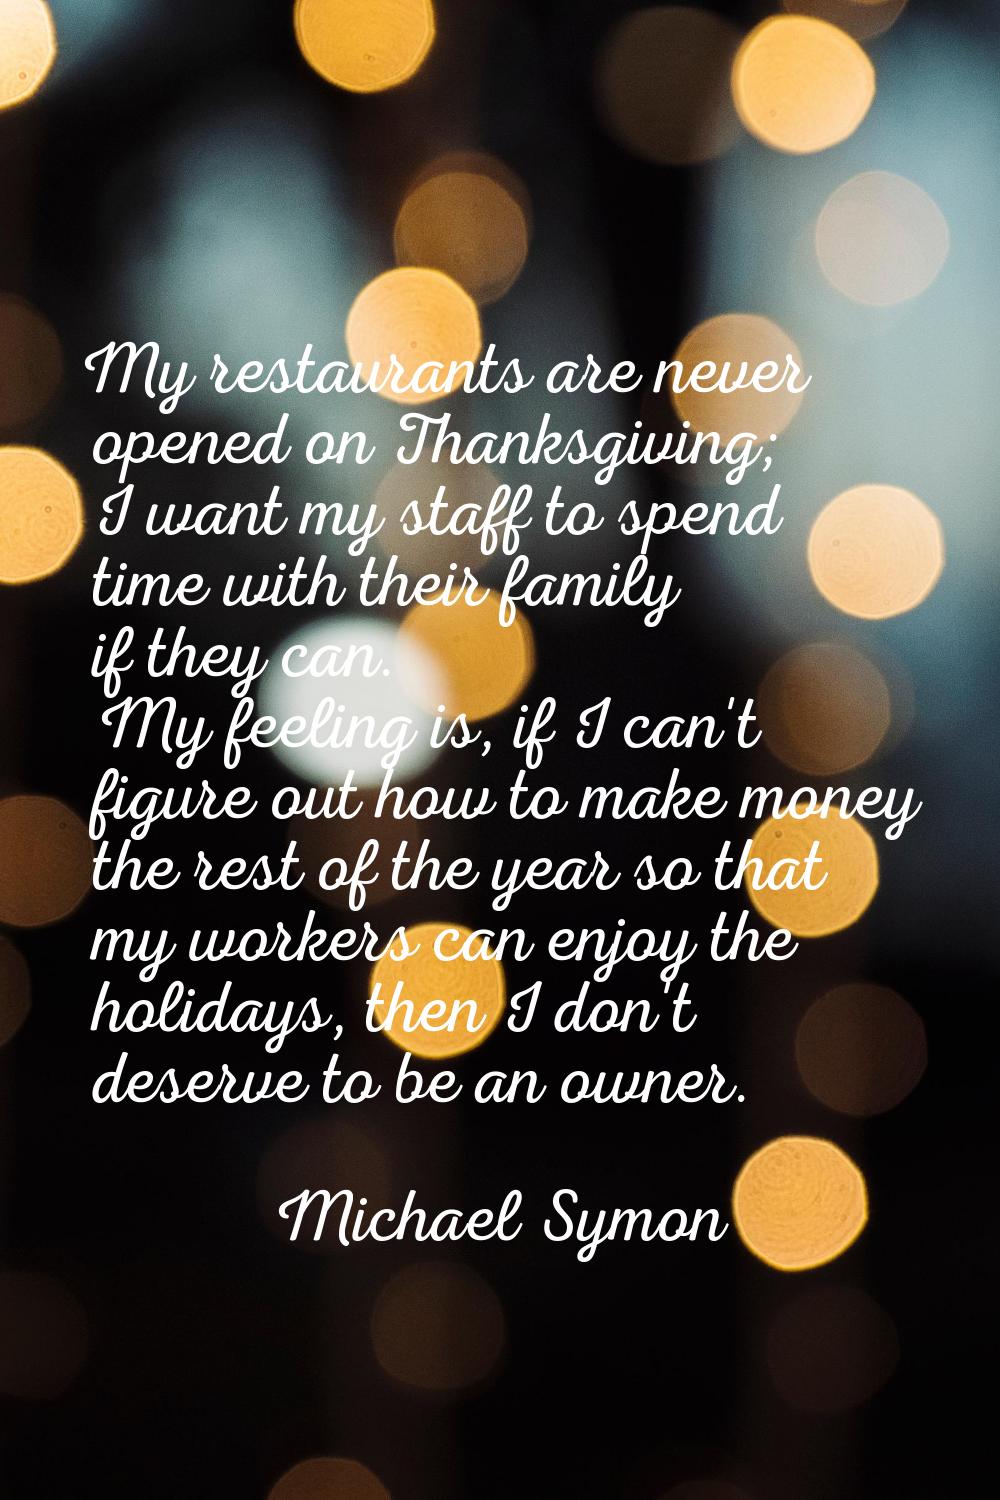 My restaurants are never opened on Thanksgiving; I want my staff to spend time with their family if